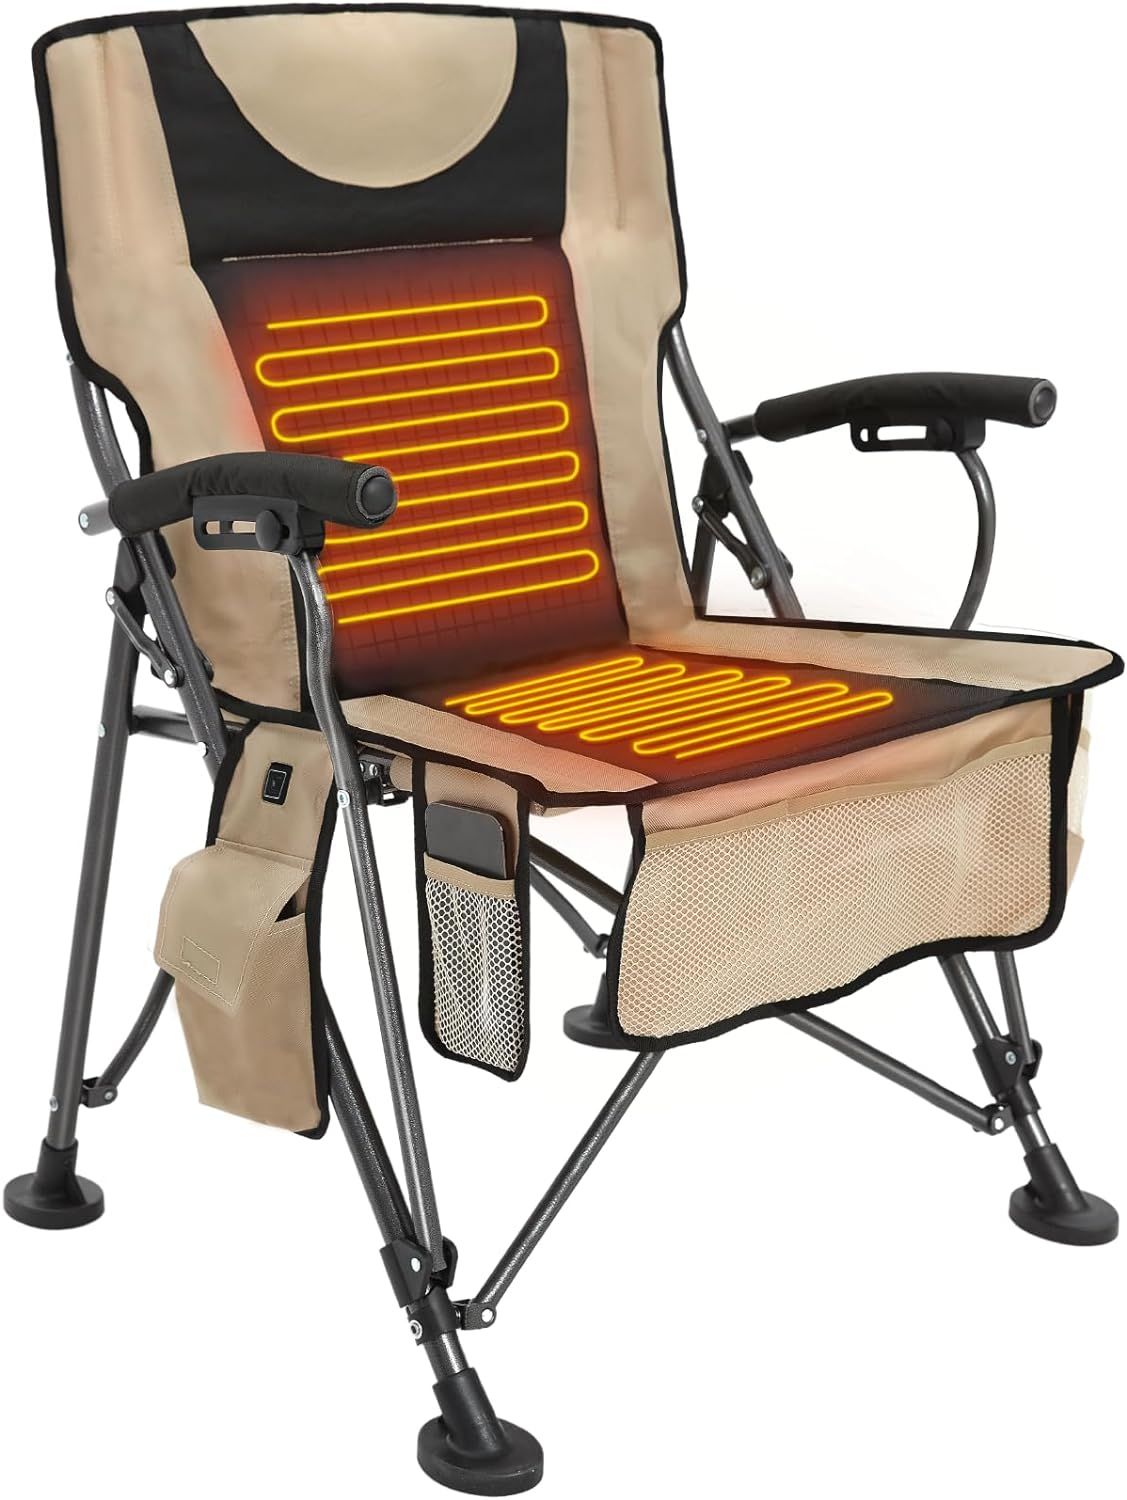 Heated Camping Chair,Dual Control Heats Back and Seat,3 Heat Levels,Heated Folding Chair with Cup... | Amazon (US)